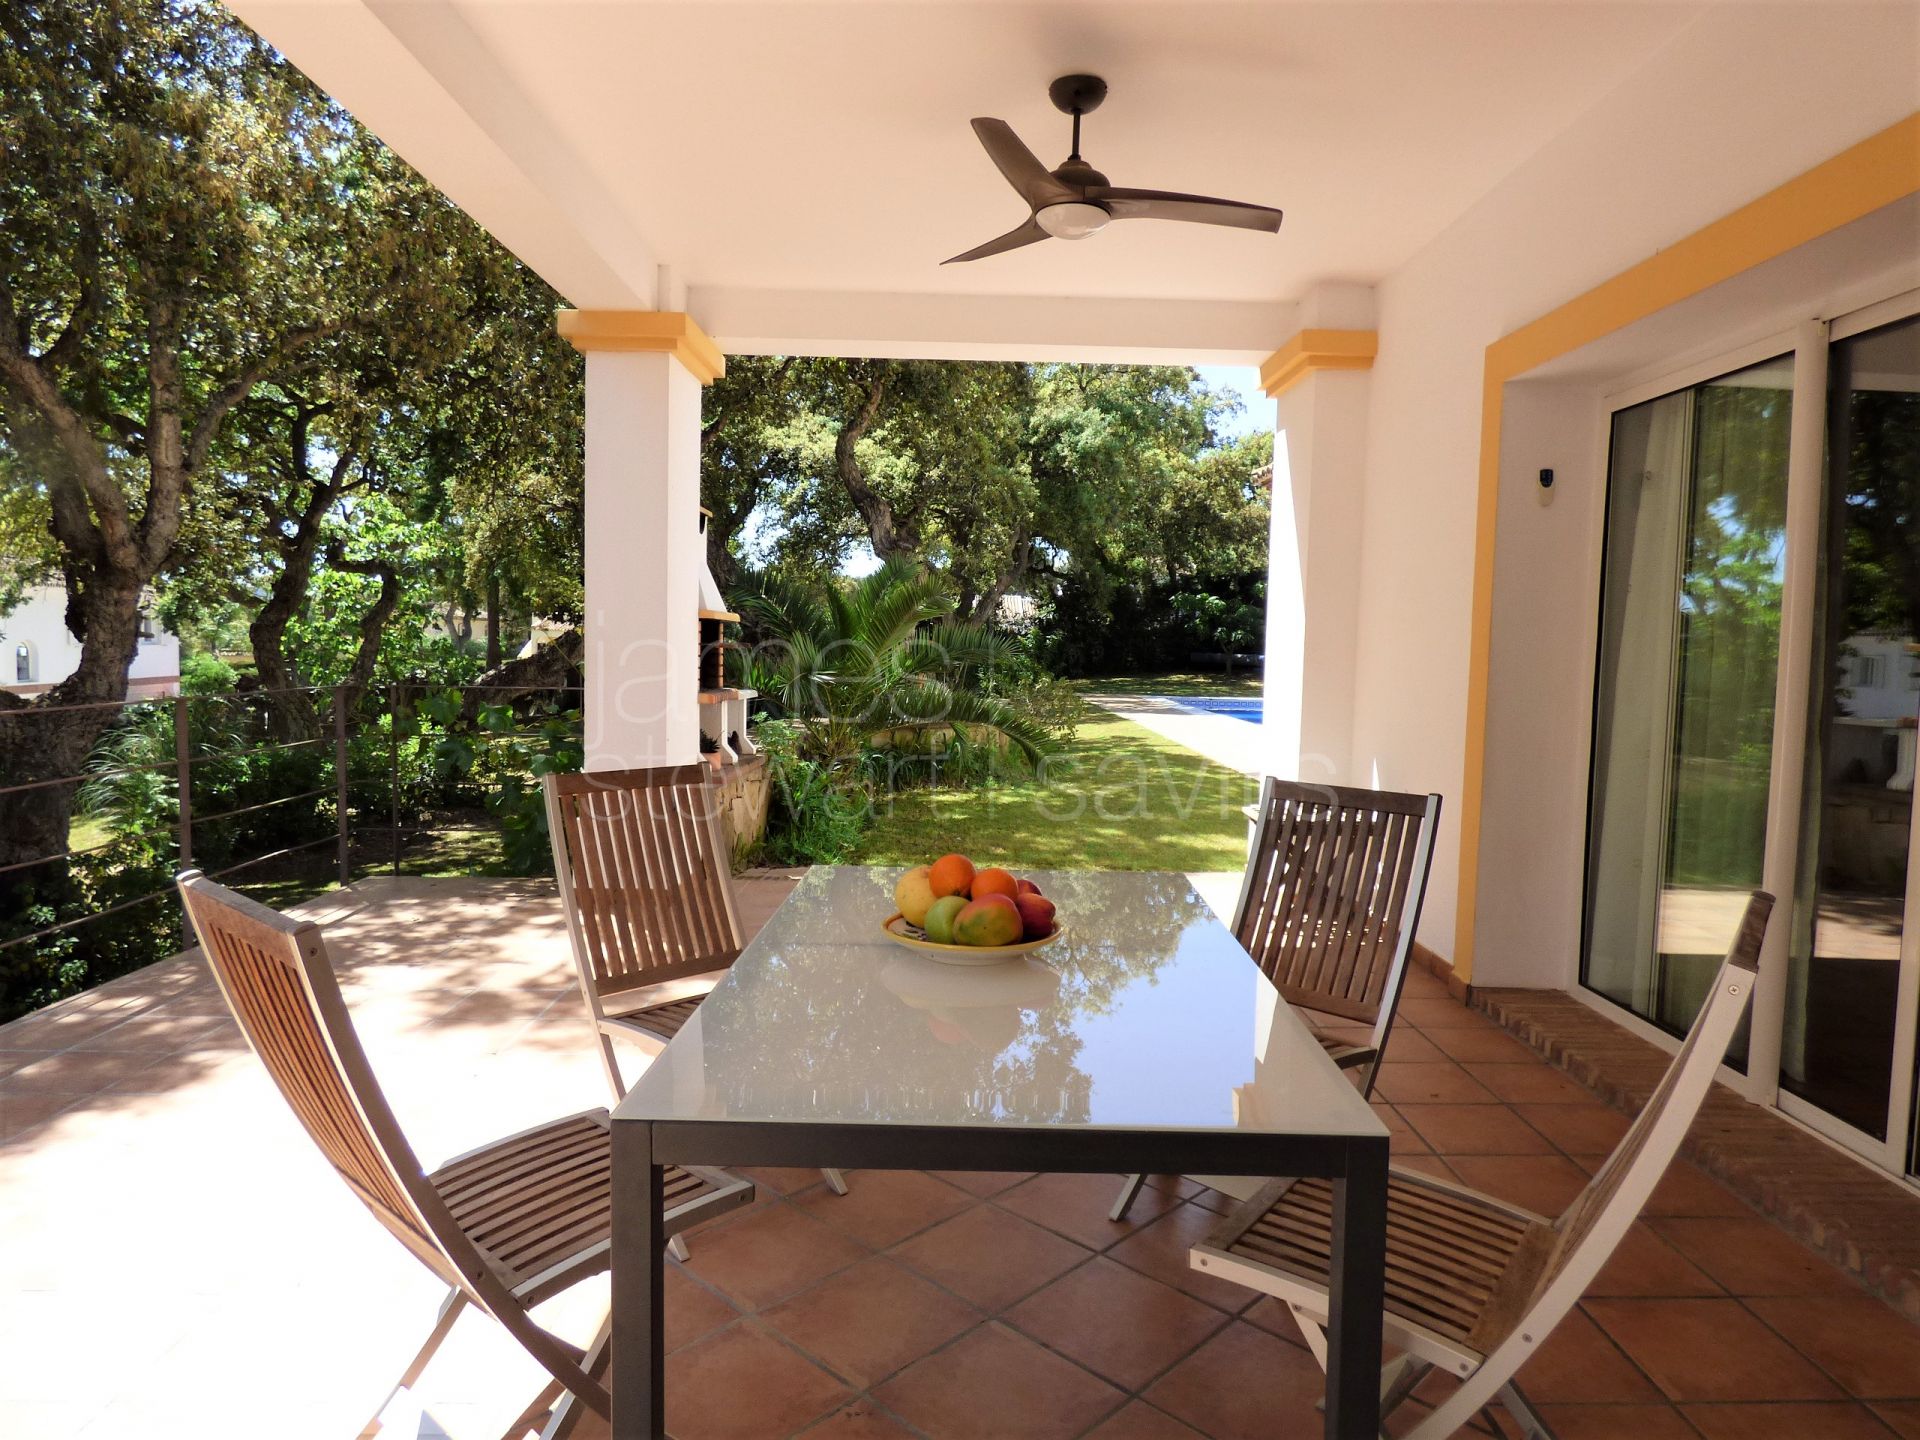 Andaluz style villa on a lovely cork oak filled plot in a quiet road in the Valderrama area